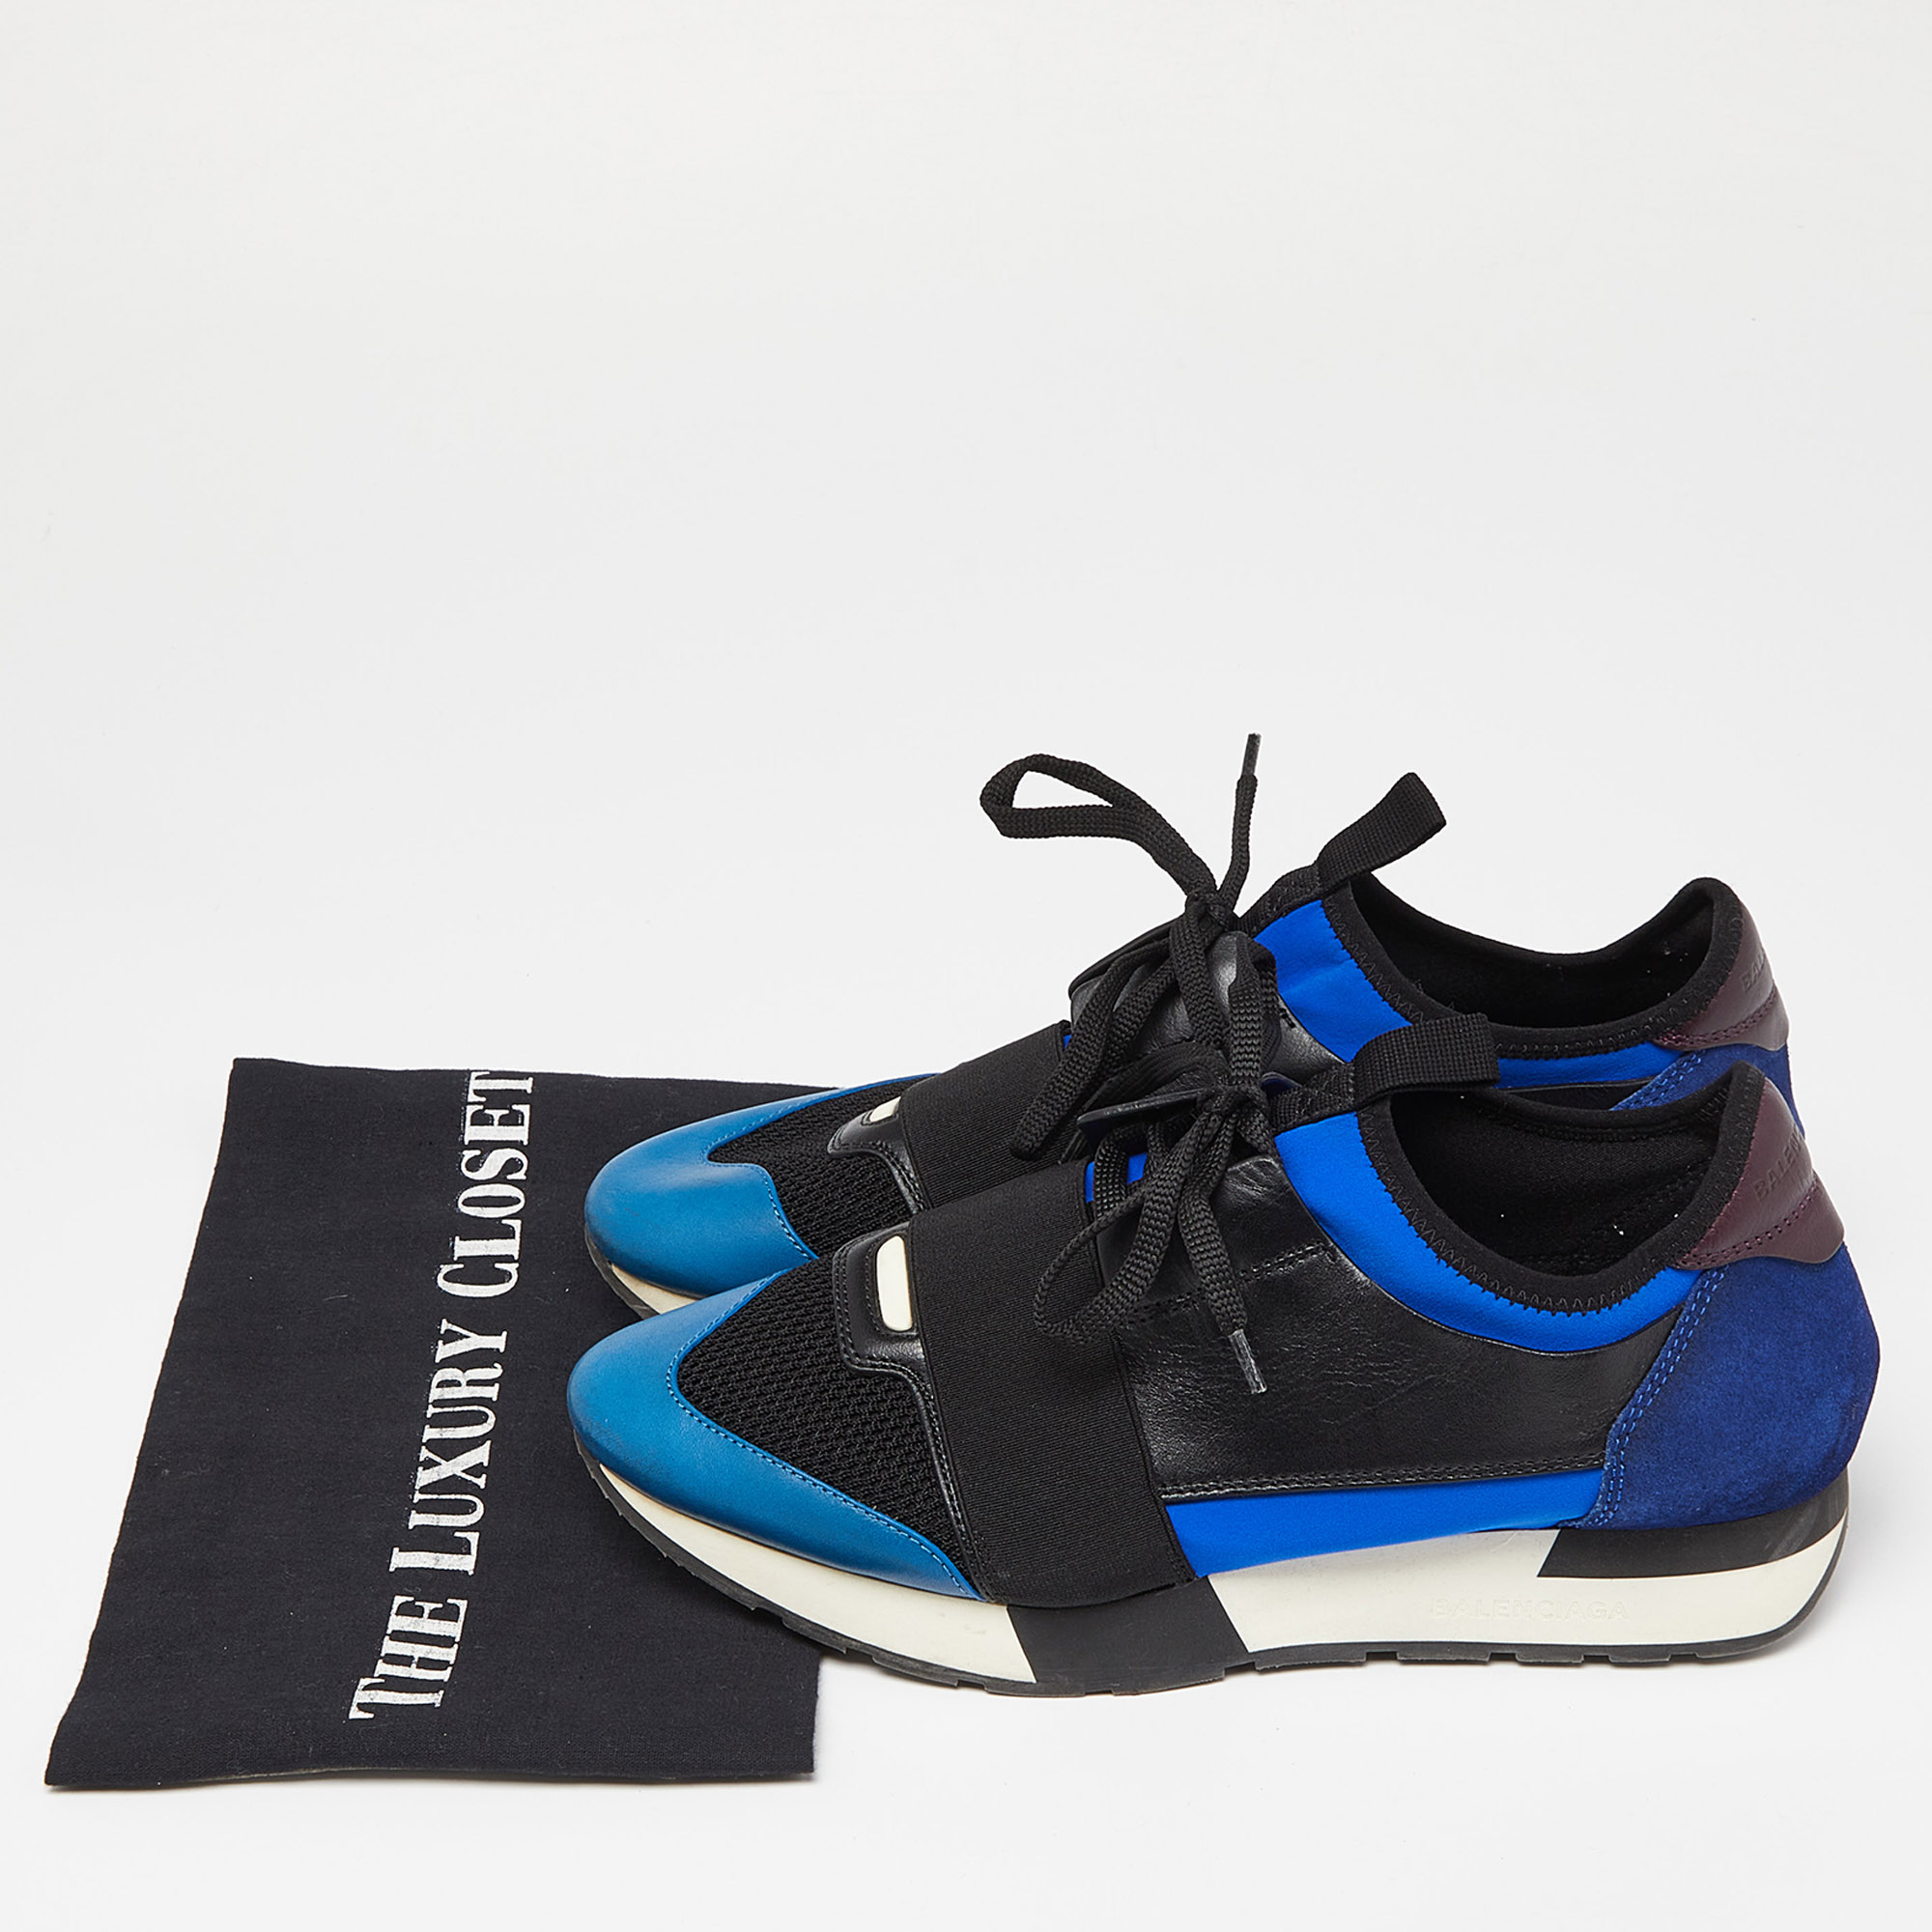 Balenciaga Tri Color Leather, Neoprene And Mesh Race Runner Sneakers Size 40